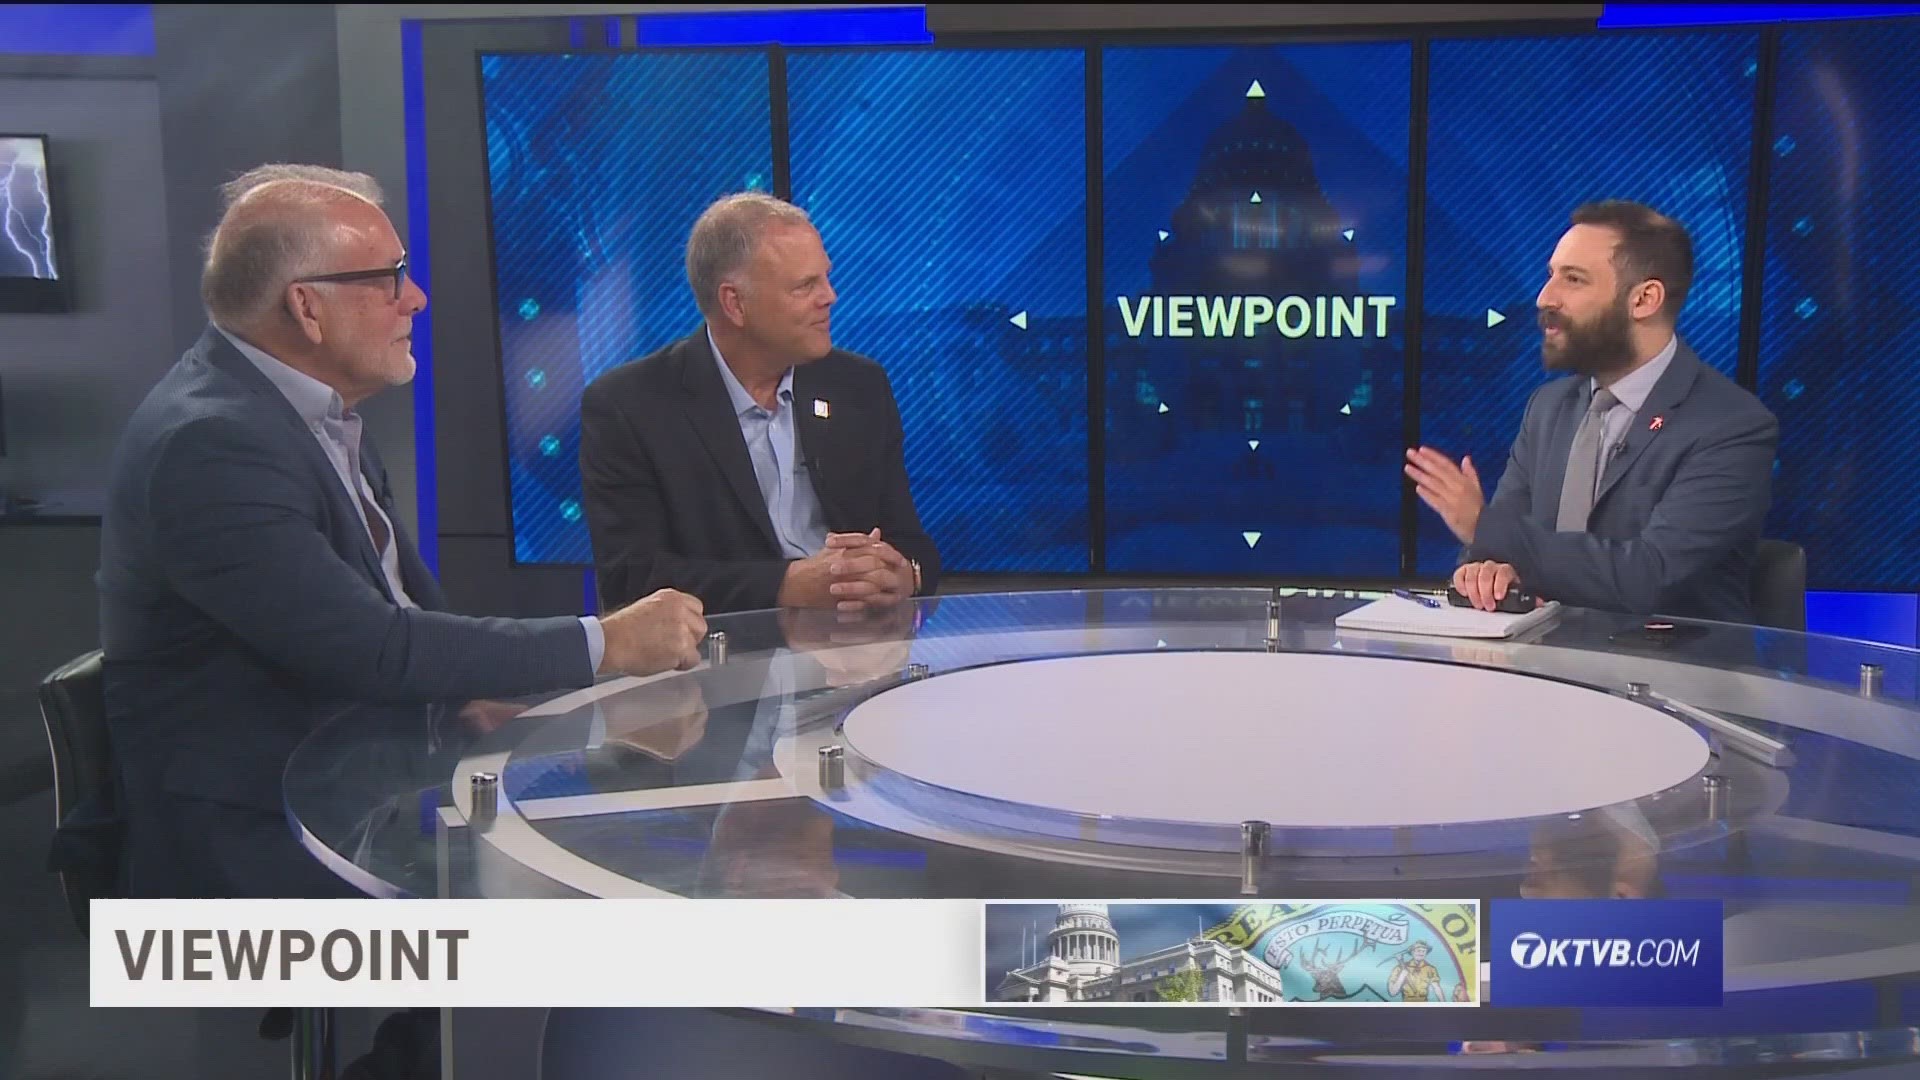 This week on Viewpoint, leaders from Boise's Wassmuth Center join the program to discuss their capital campaign, new construction, and welcoming a new leader.